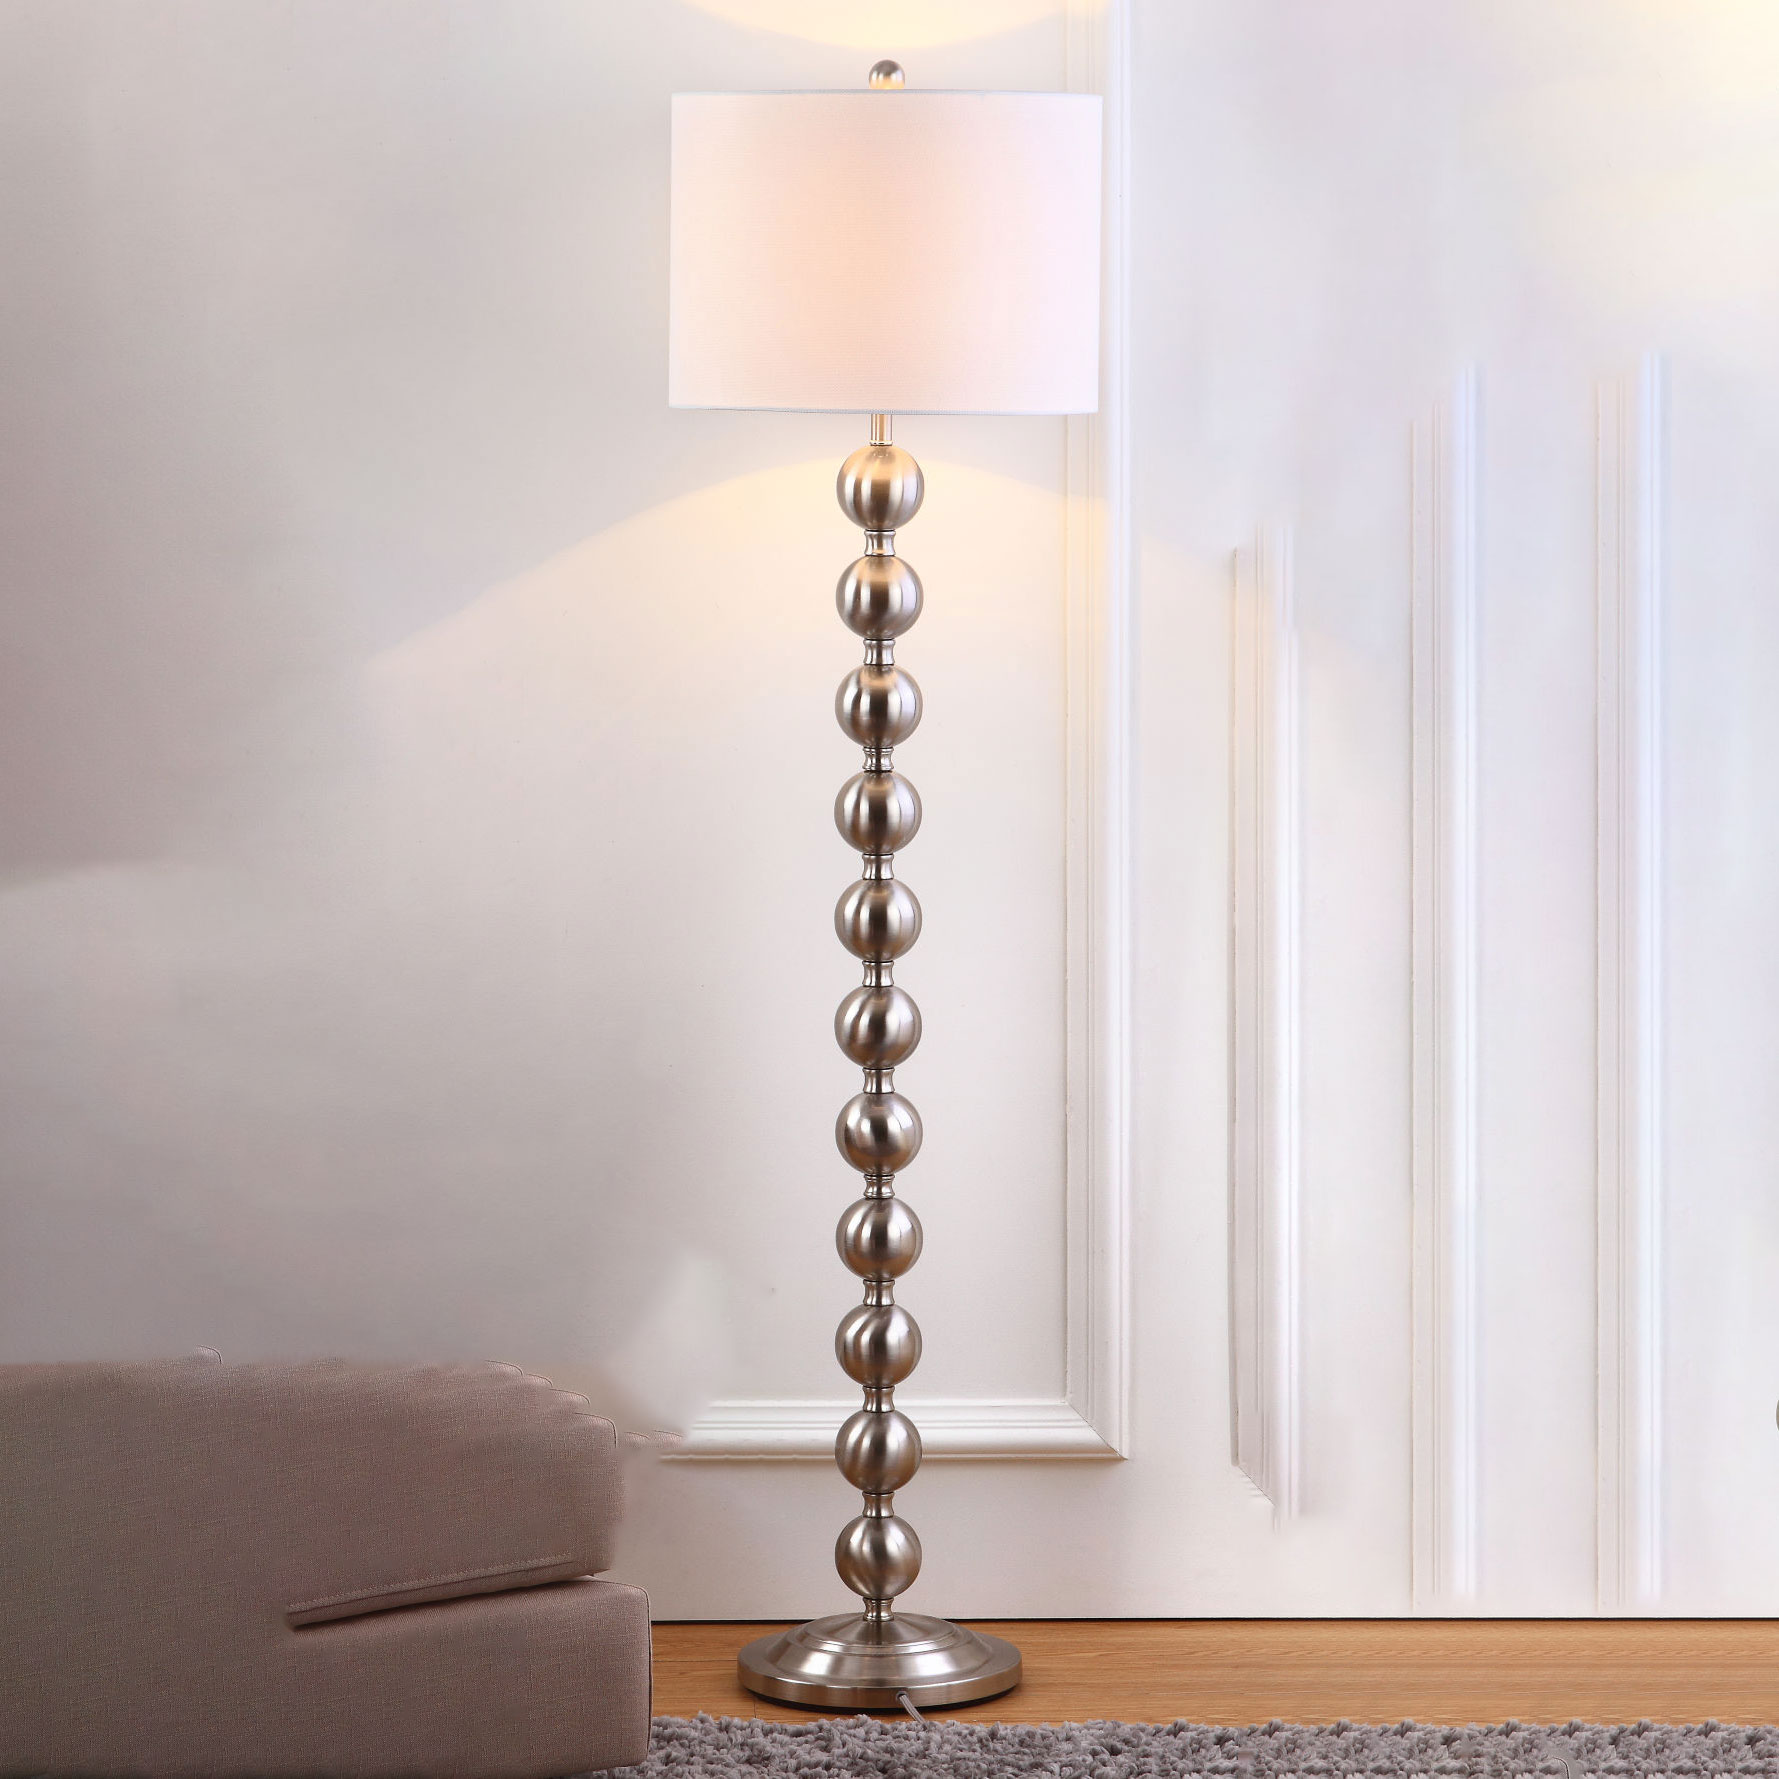 Reflections 58.5-Inch H Stacked Ball Floor Lamp